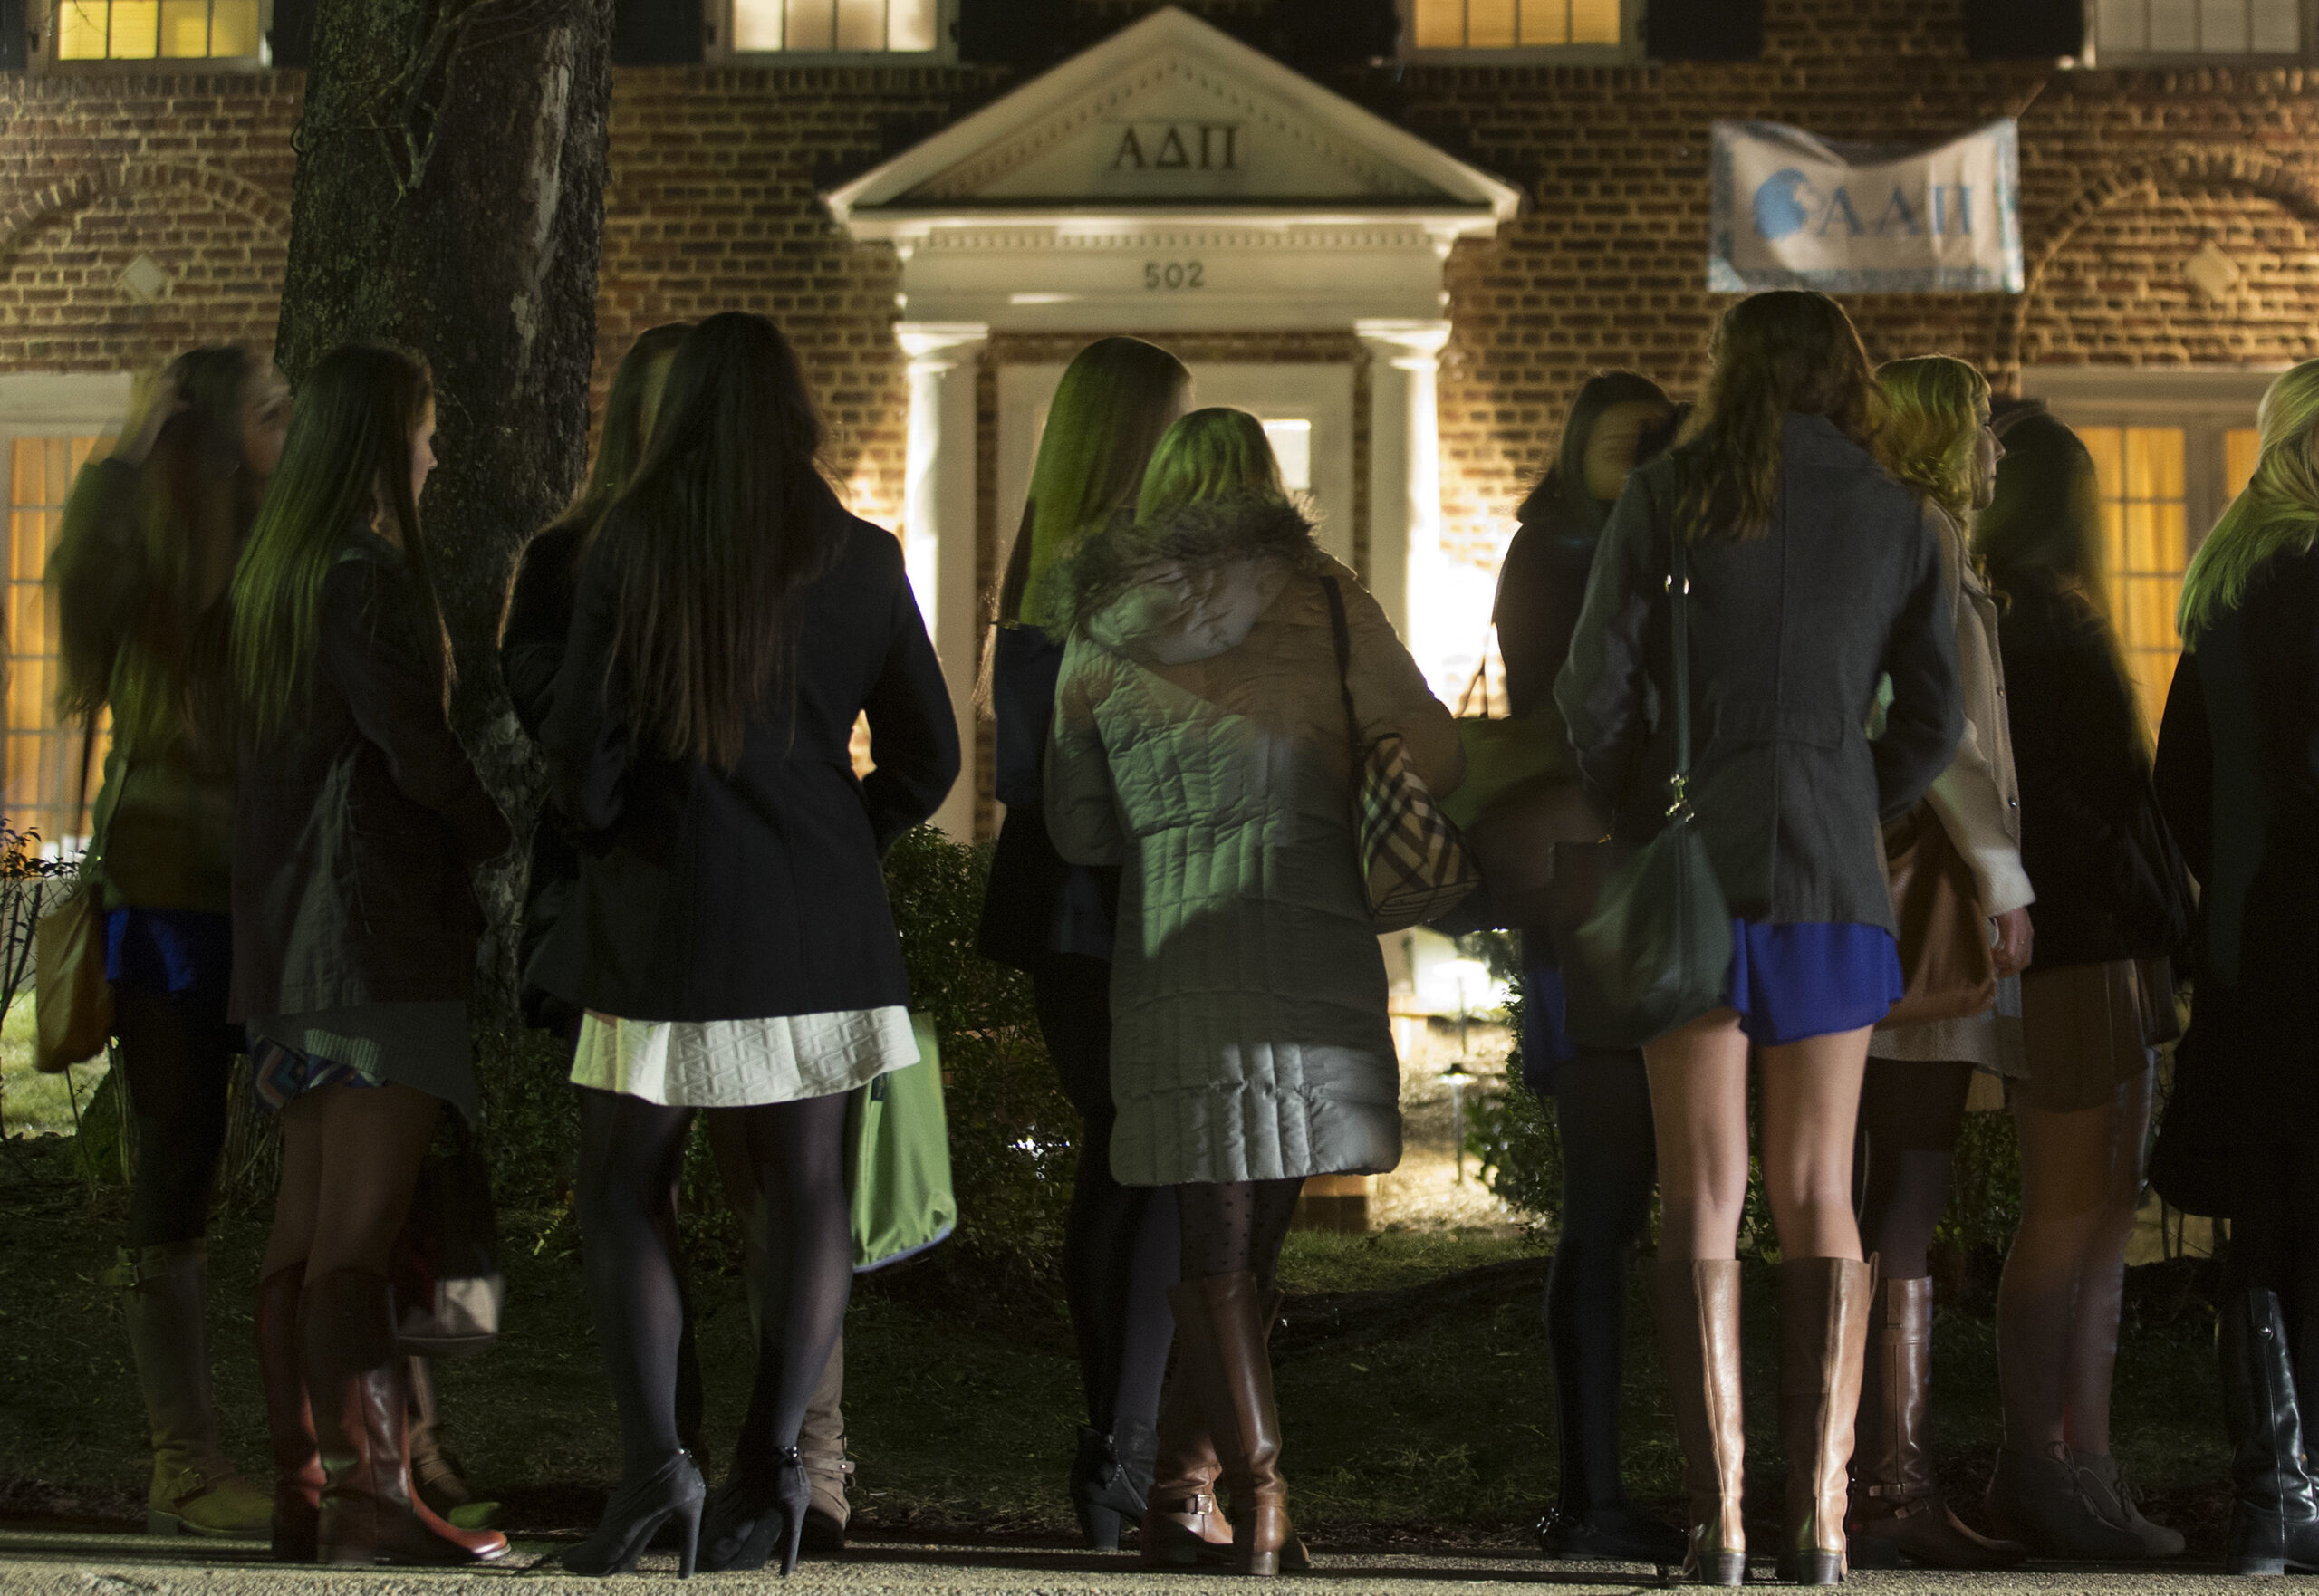 University Of Virginia Lifts Suspension On Fraternity Activities